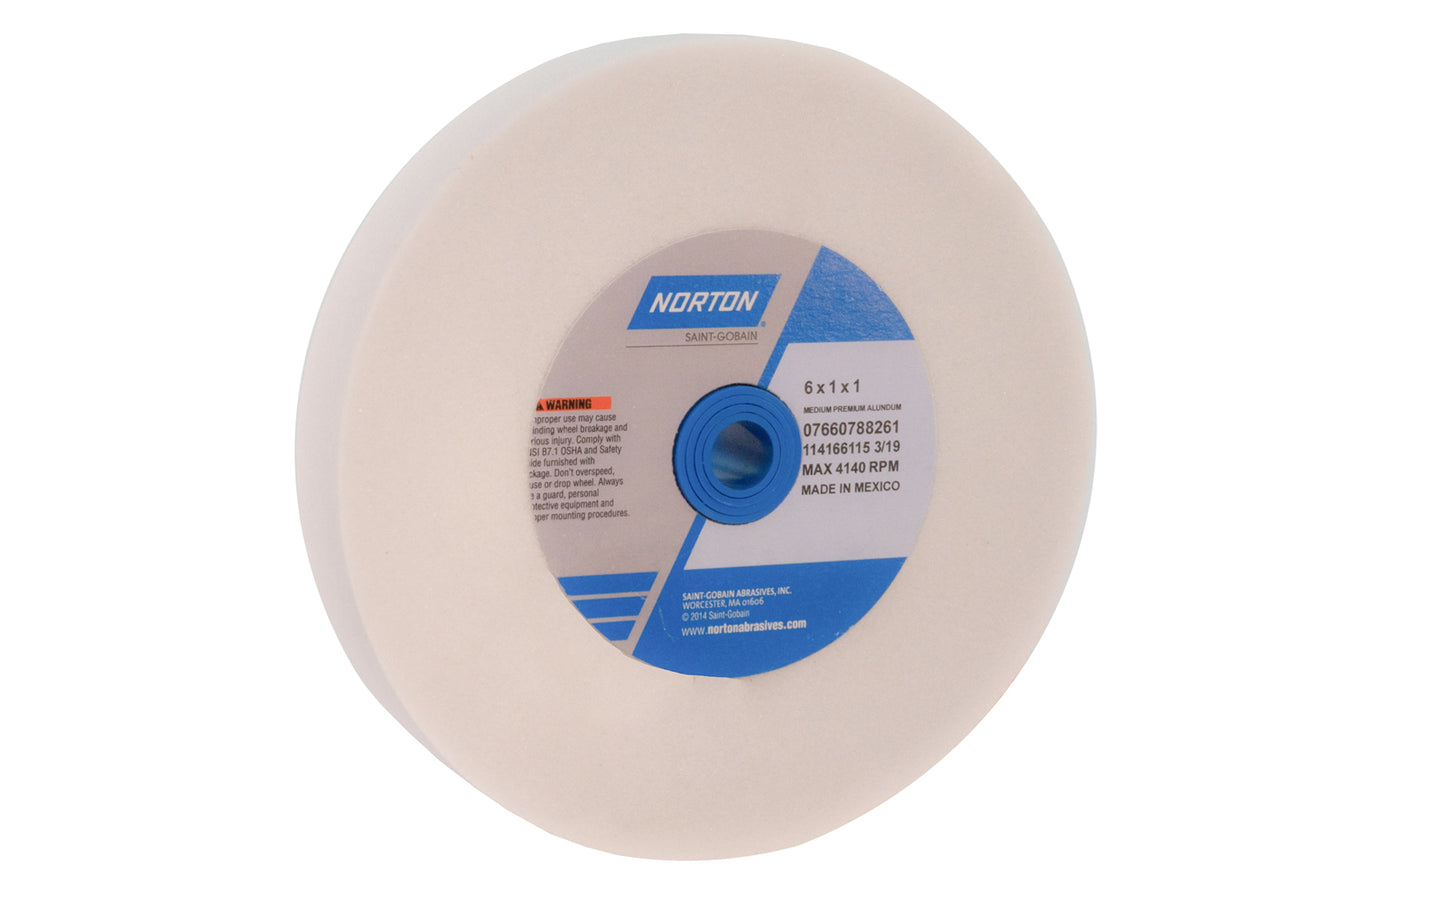 6" Aluminum Oxide Bench Grinding Wheel made by Norton. Designed for general purpose grinding on steel, high speed steels, & ferrous metals. Used for sharpening edges on tools. Materials that can be worked on include:  6" diameter of wheel. 1" thickness. 150 grit.  